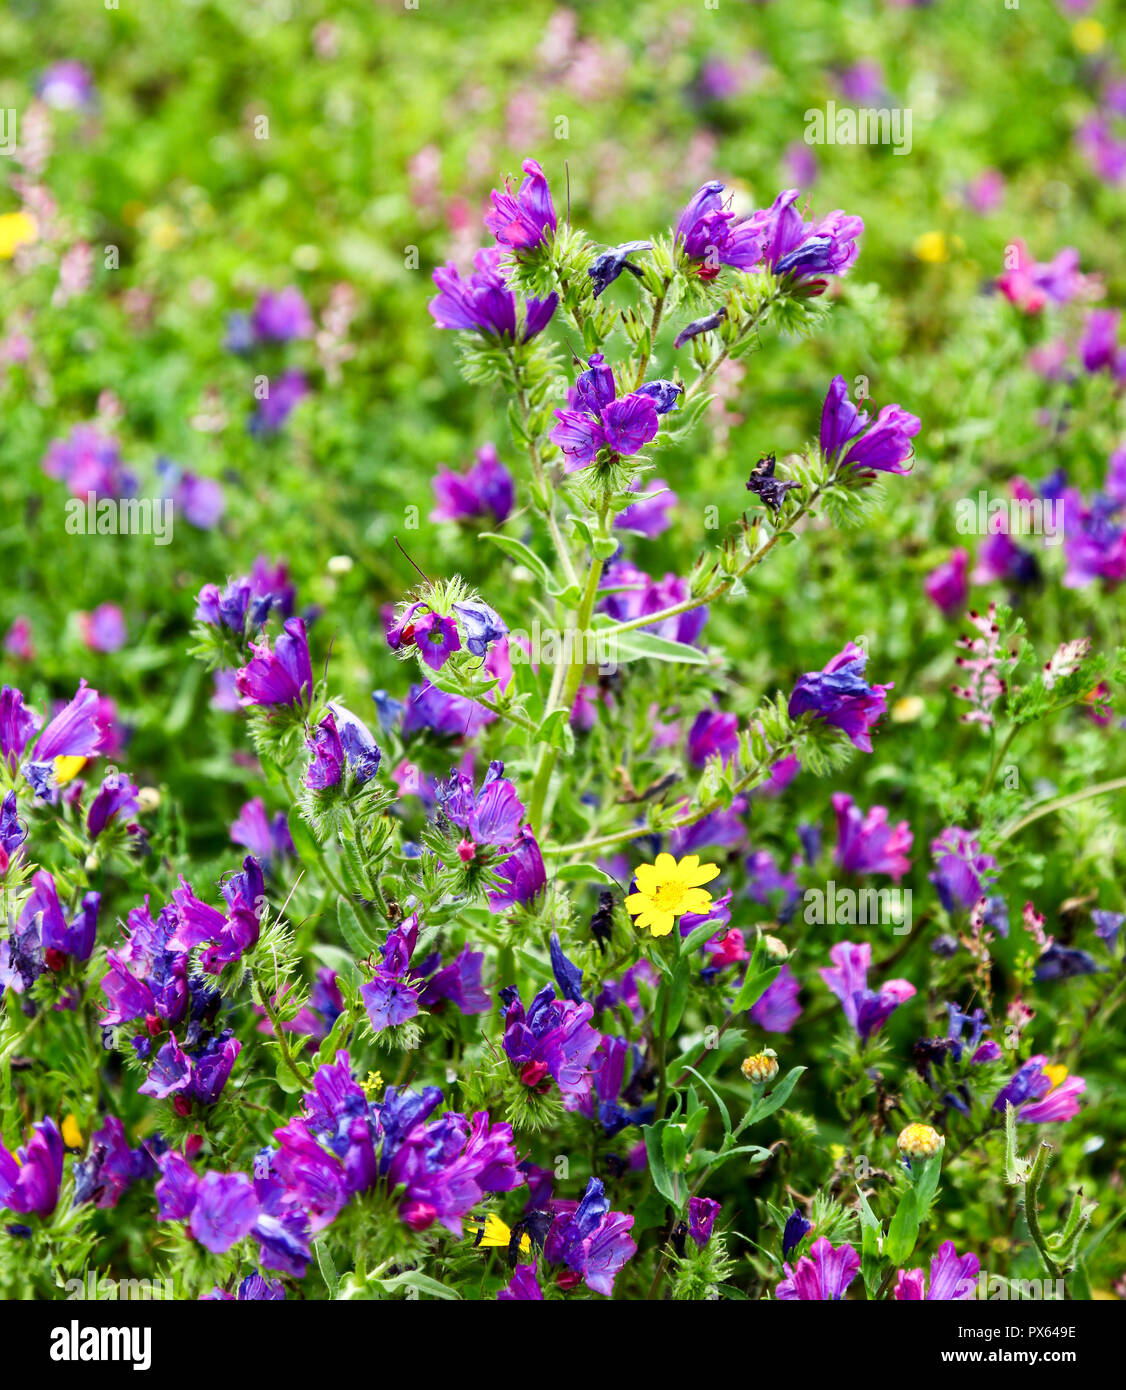 Viper’s-bugloss (Echium vulgare) and Yellow Corn Marigold (Glebionis segetum) flowers in a field at St. Just in Penwith, Cornwall, England, UK Stock Photo